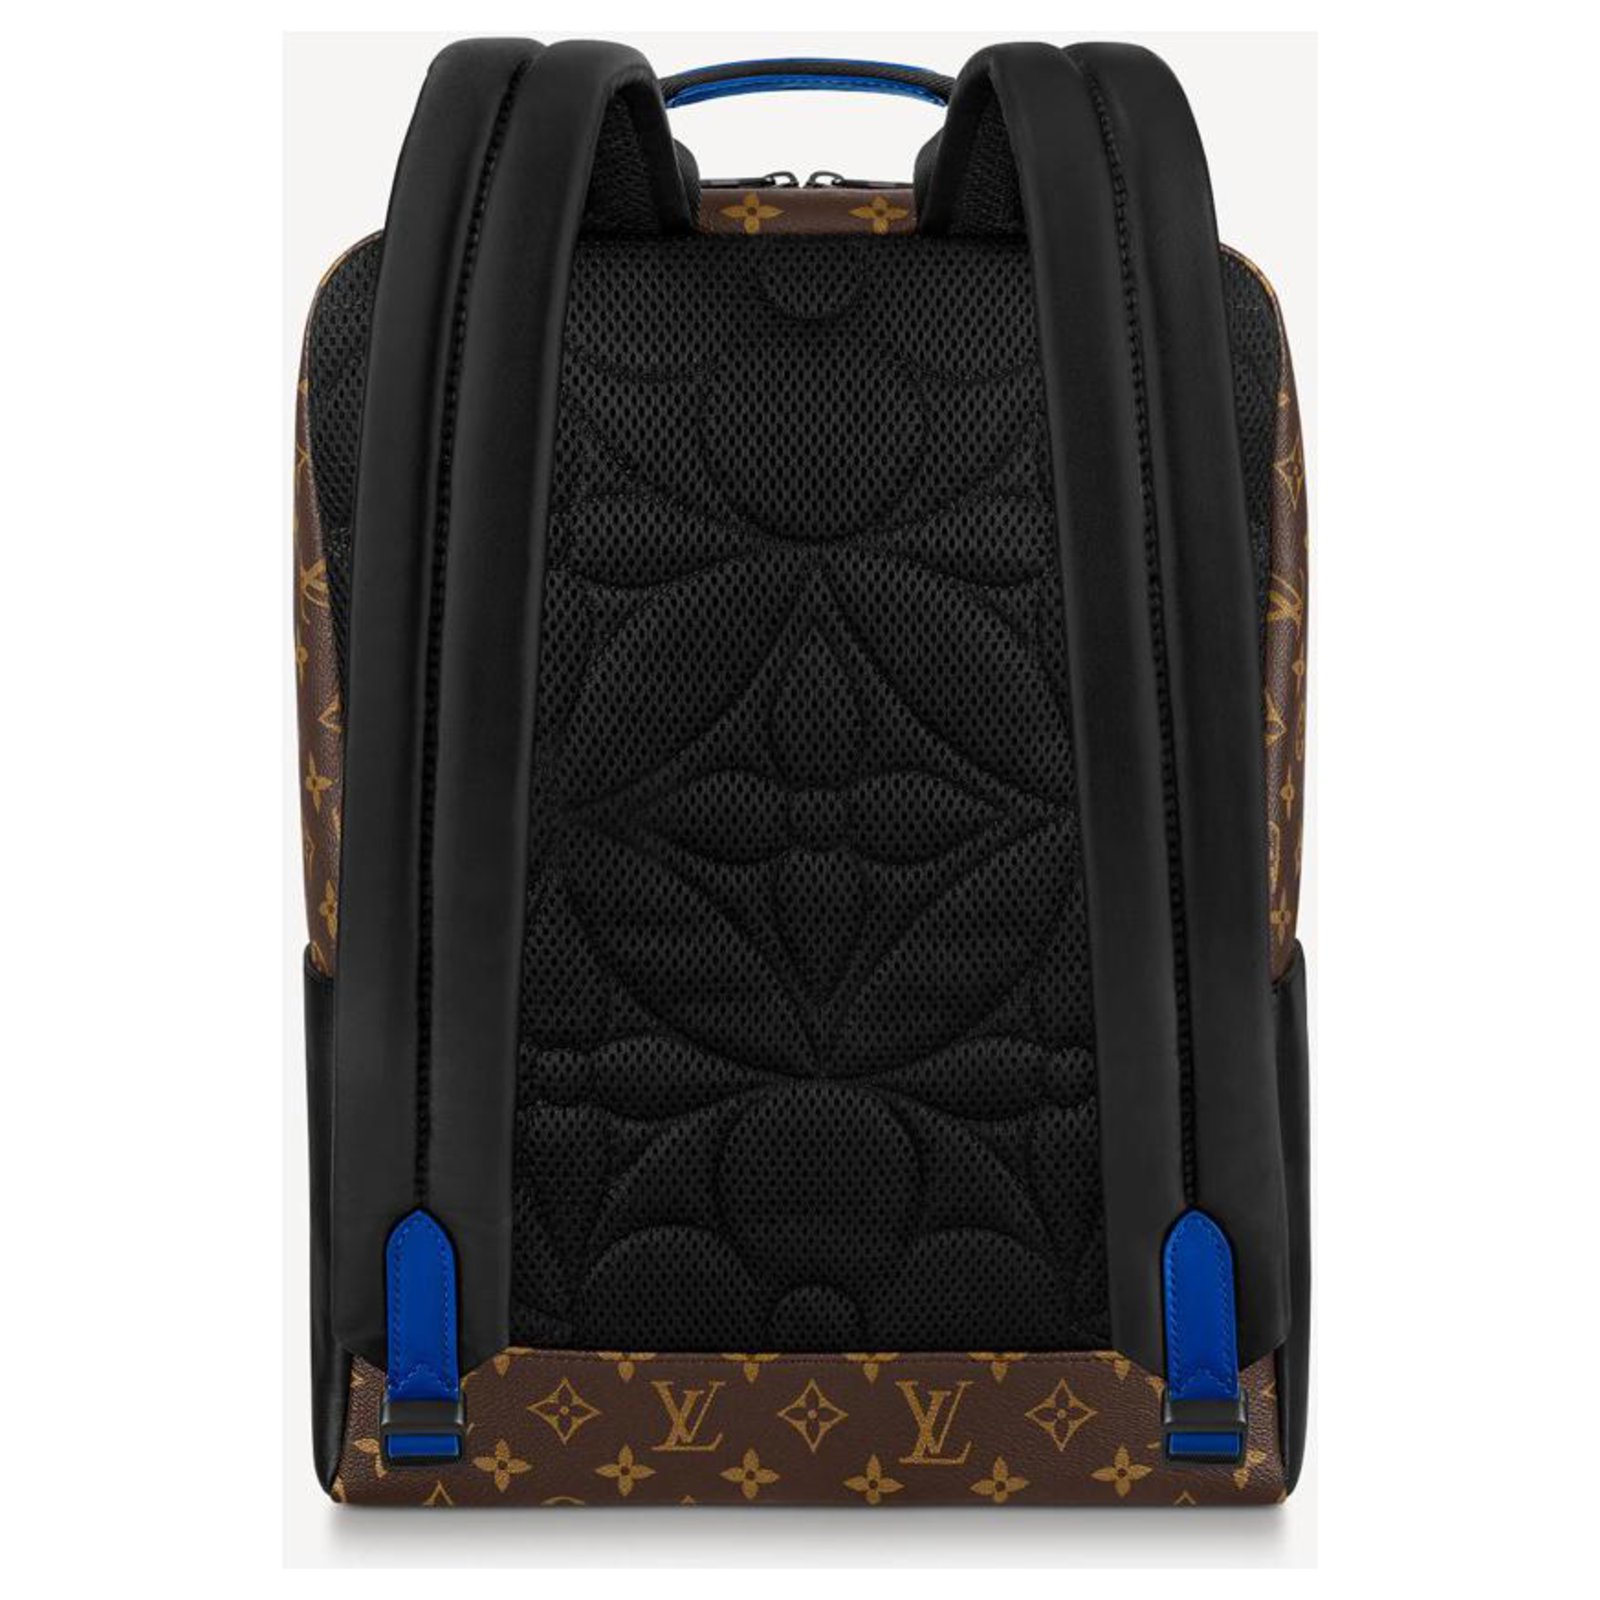 LV Dean backpack with blue